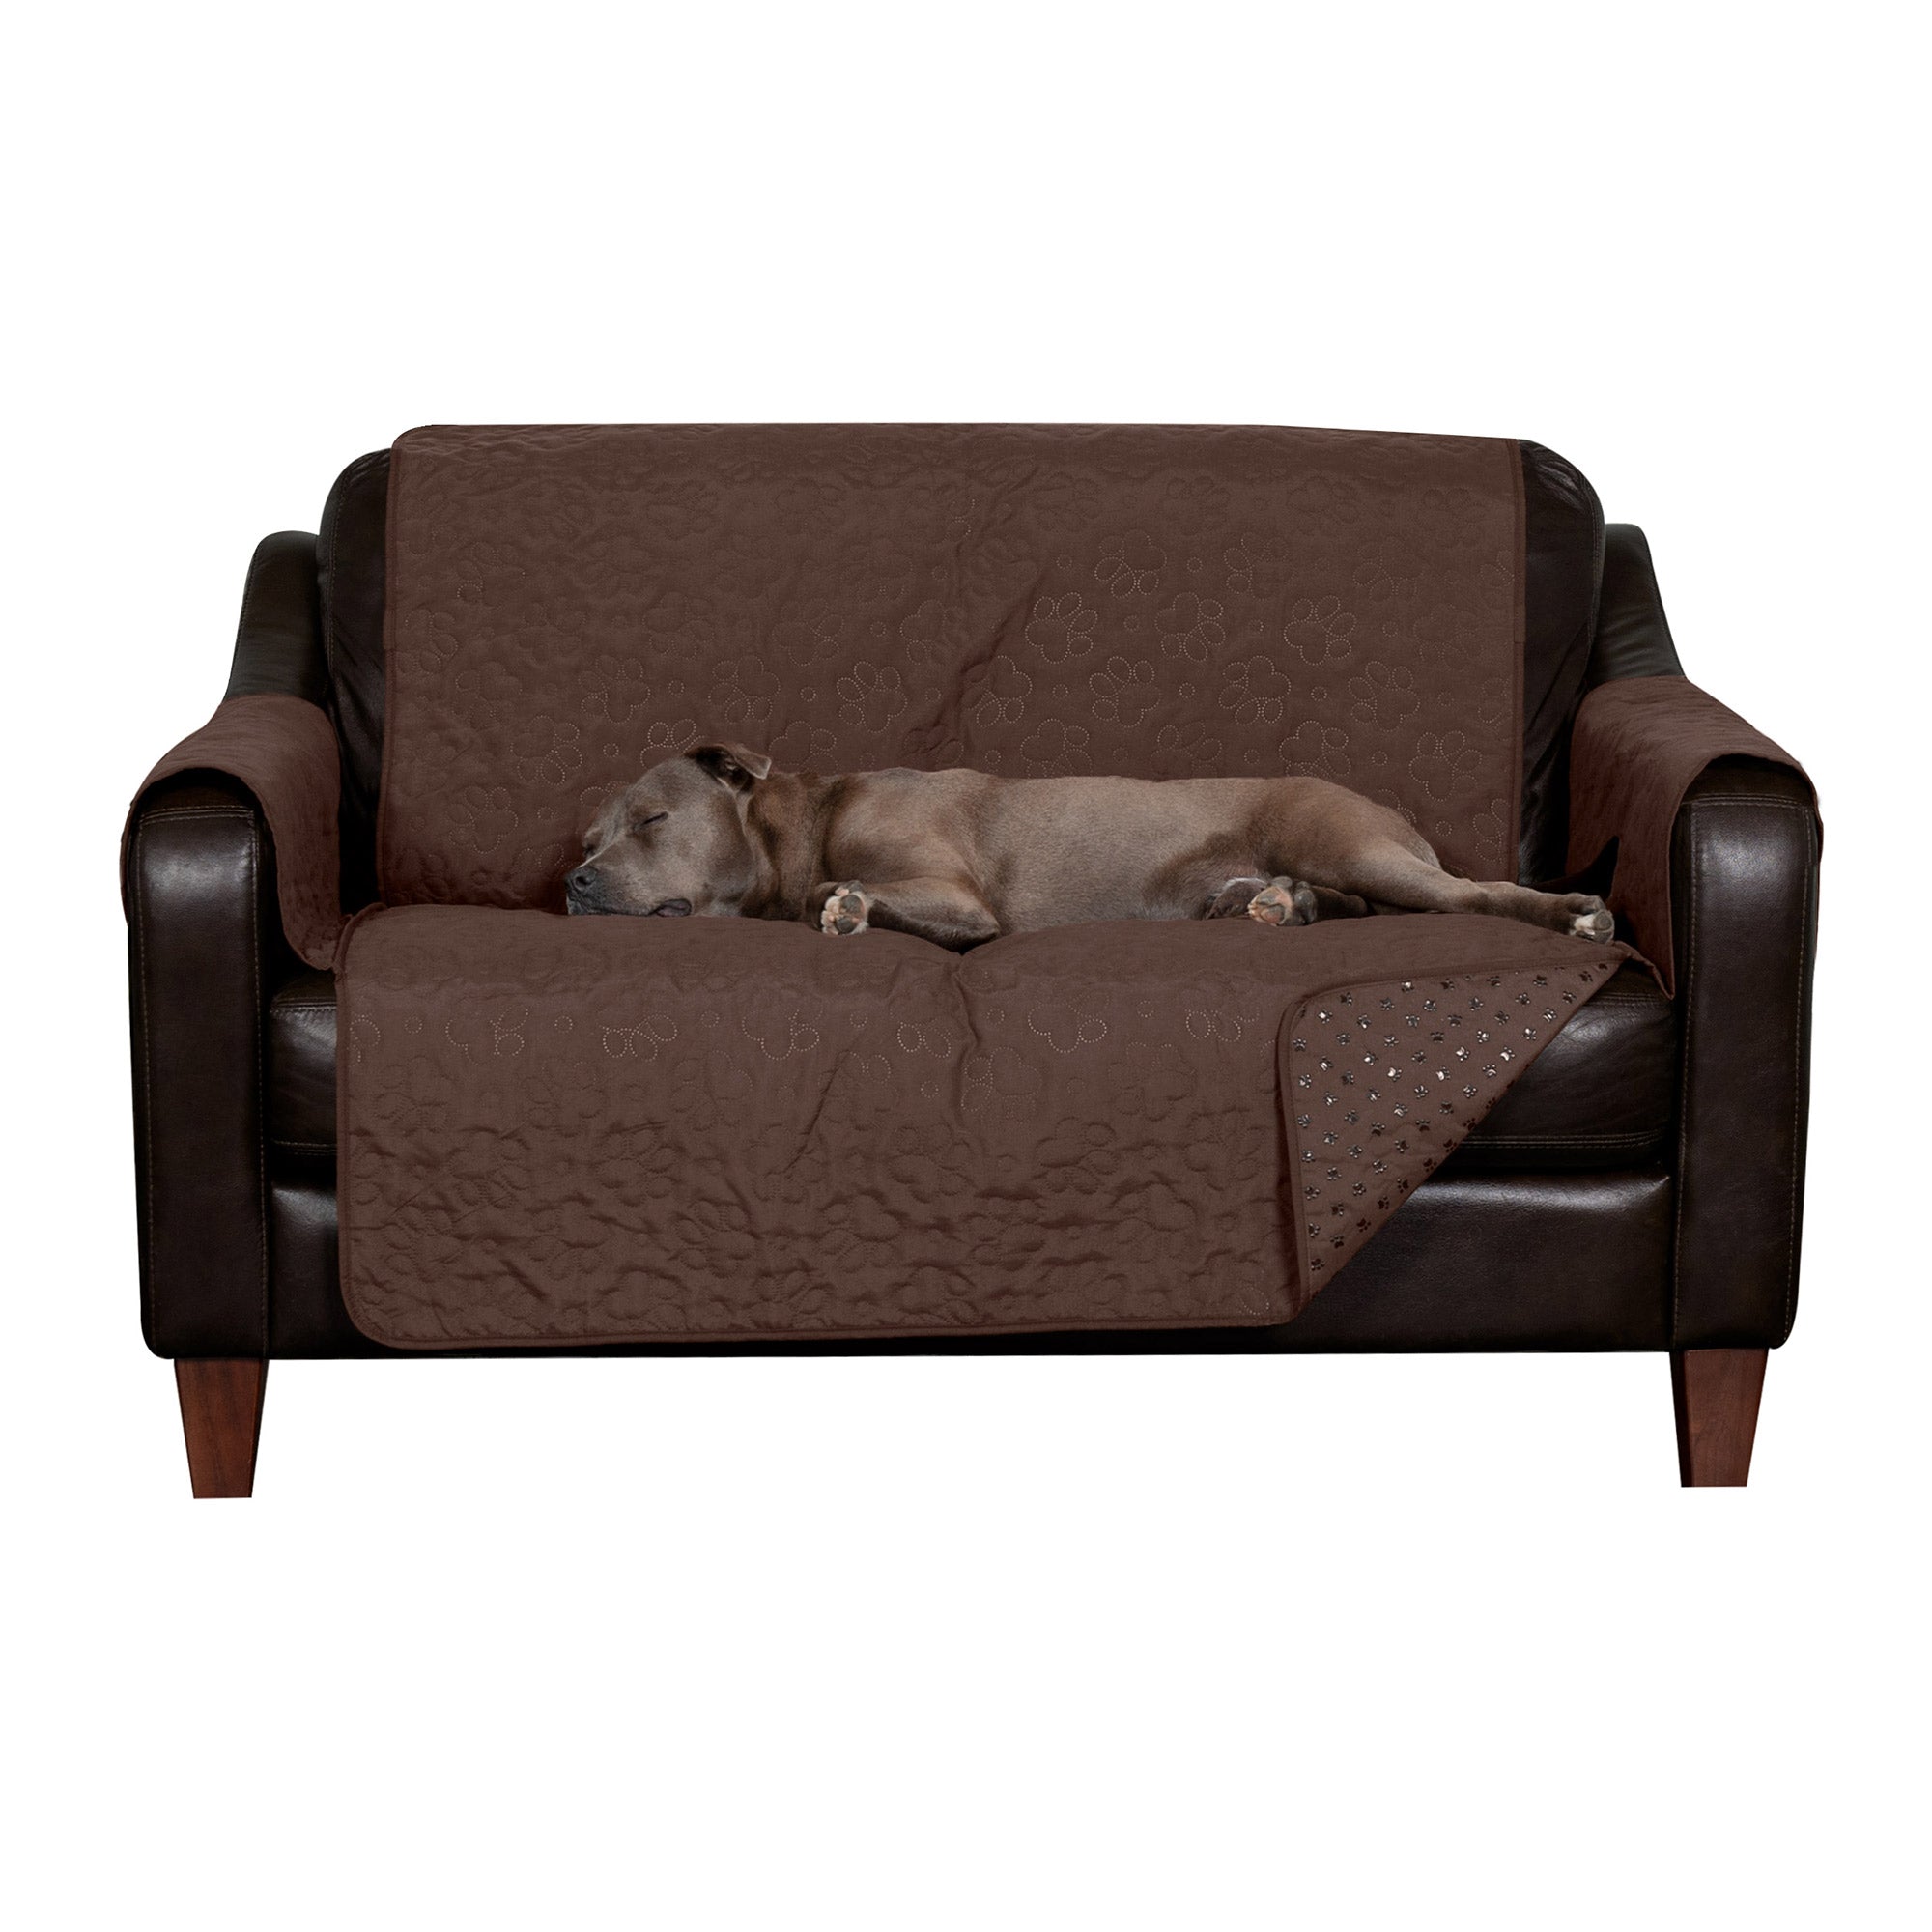 Leather Sherpa Furniture Protector for Dogs - Great Gear And Gifts For Dogs  at Home or On-The-Go